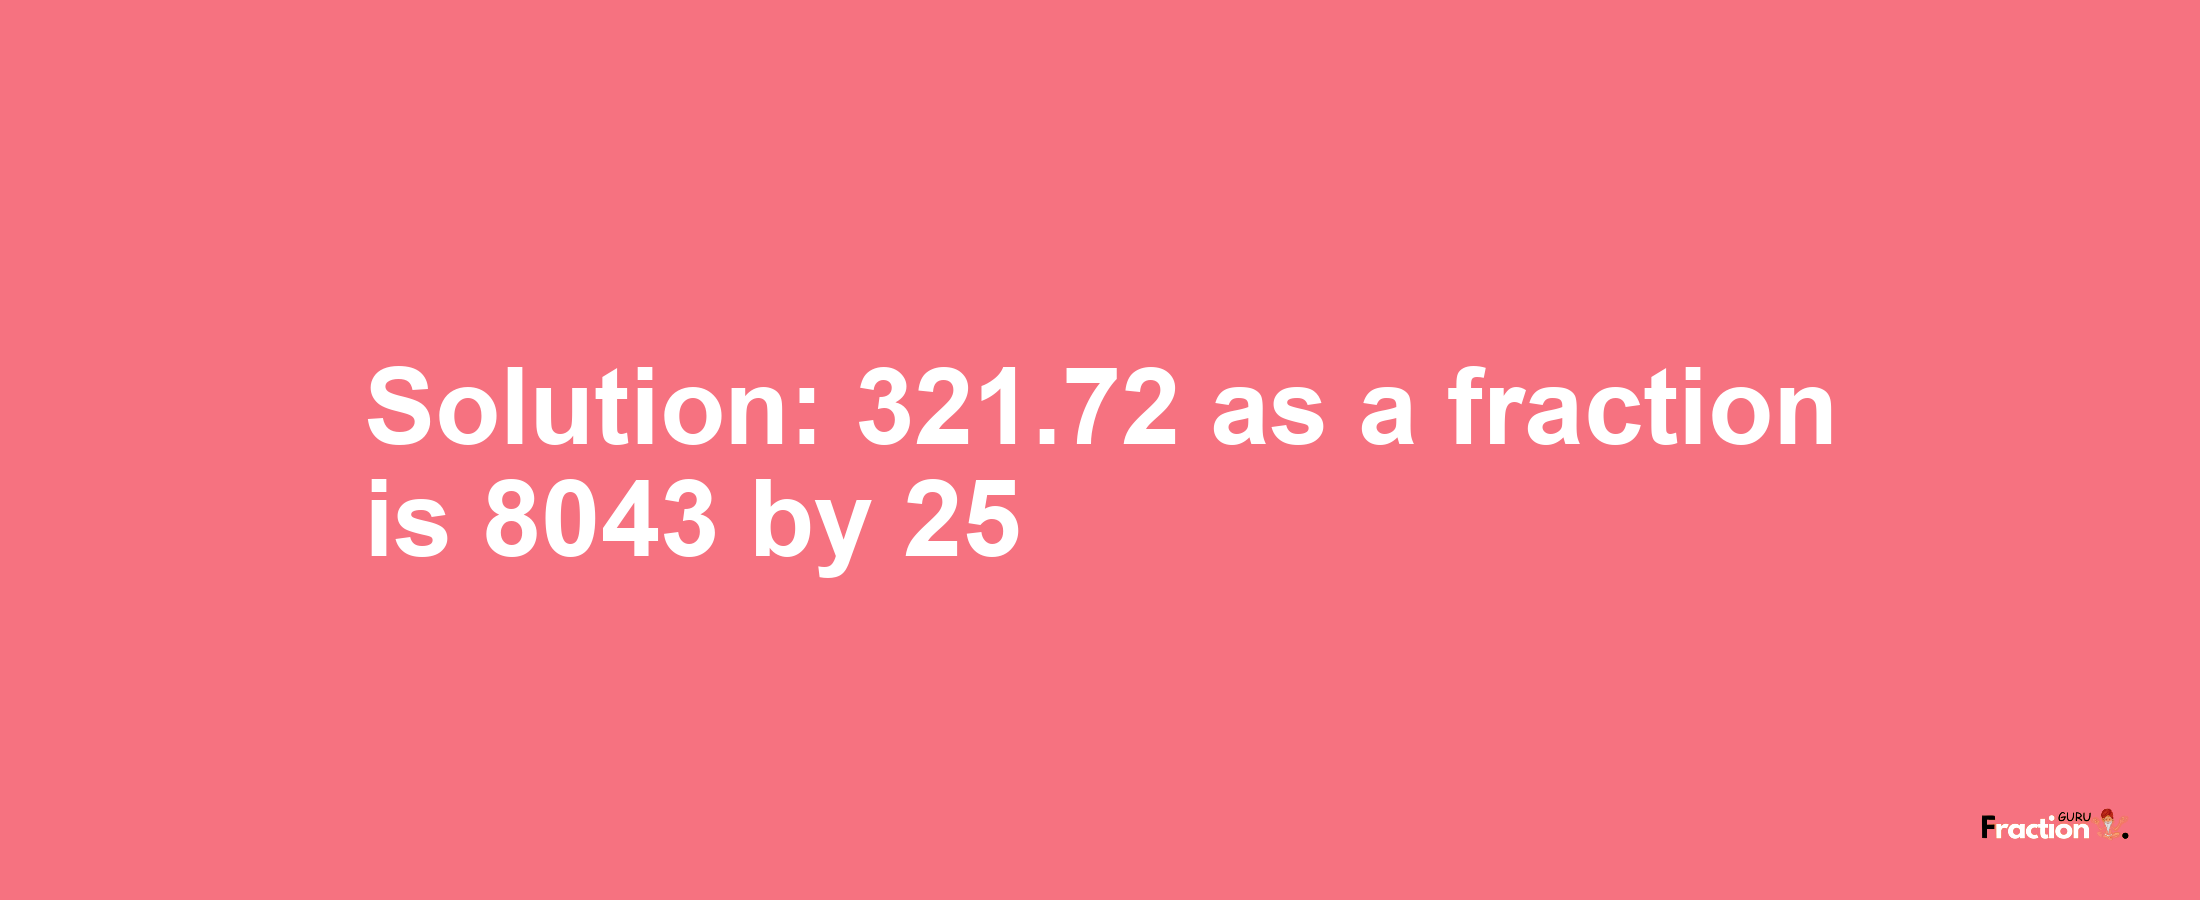 Solution:321.72 as a fraction is 8043/25